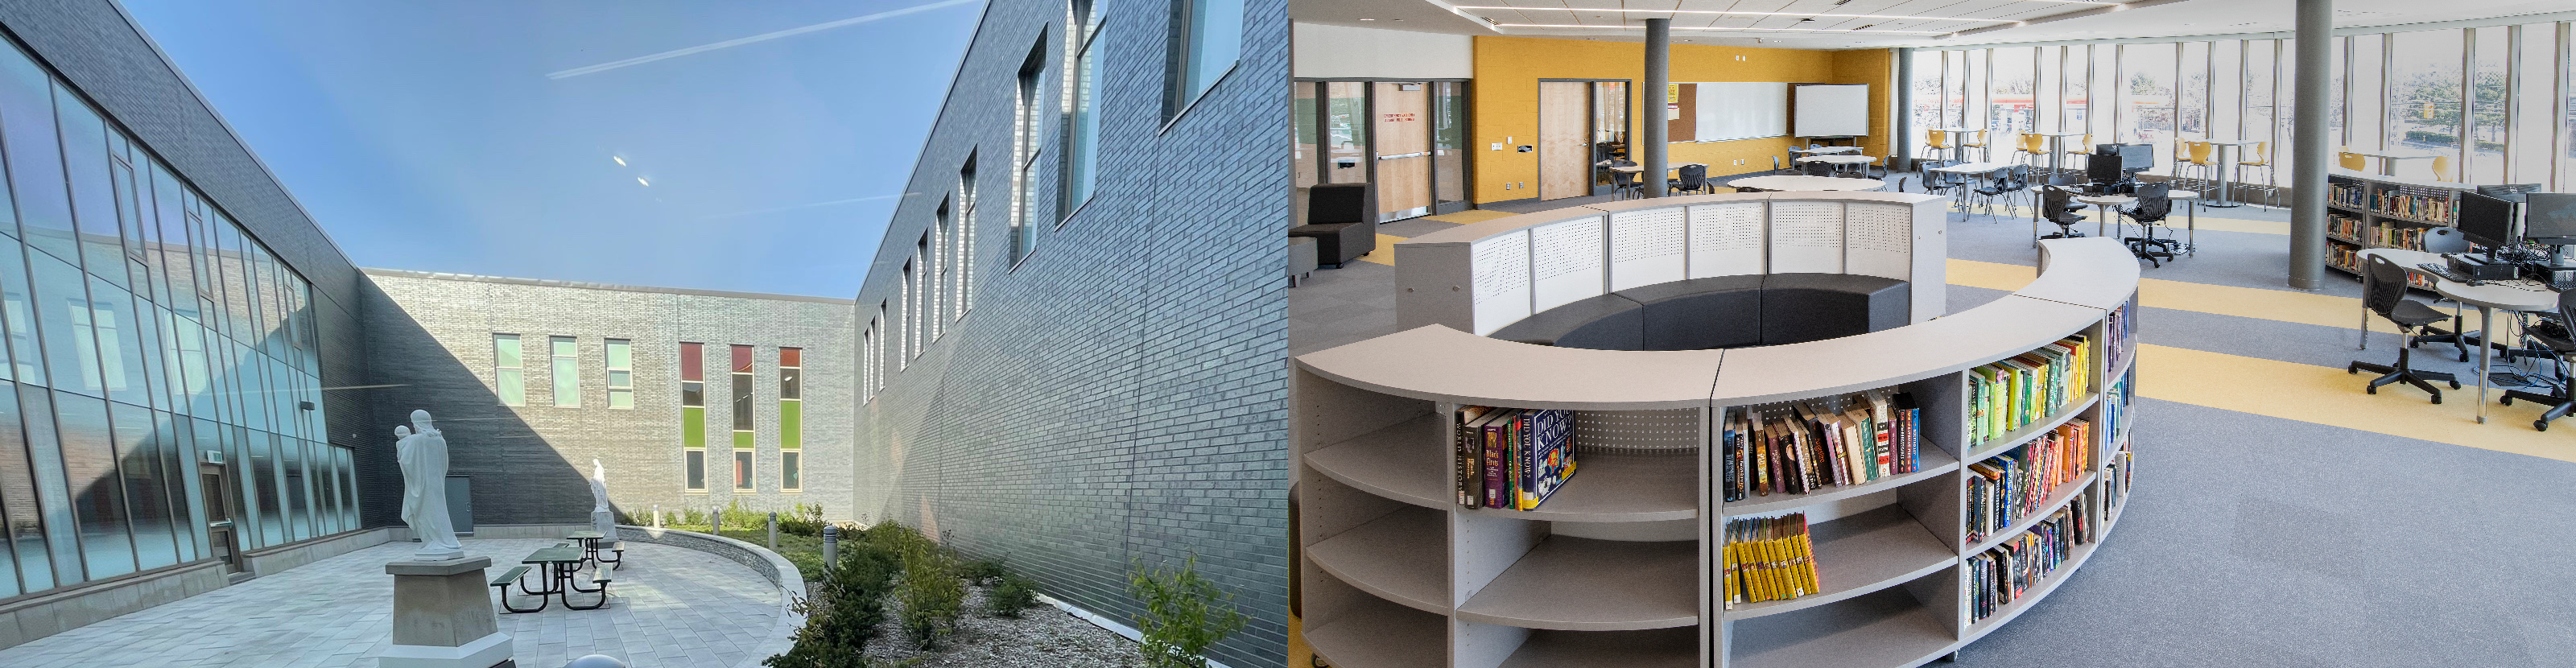 On the right, the exterior courtyard of the SJMP building. On the right, the inside of the SJMP Library/Learning Commons